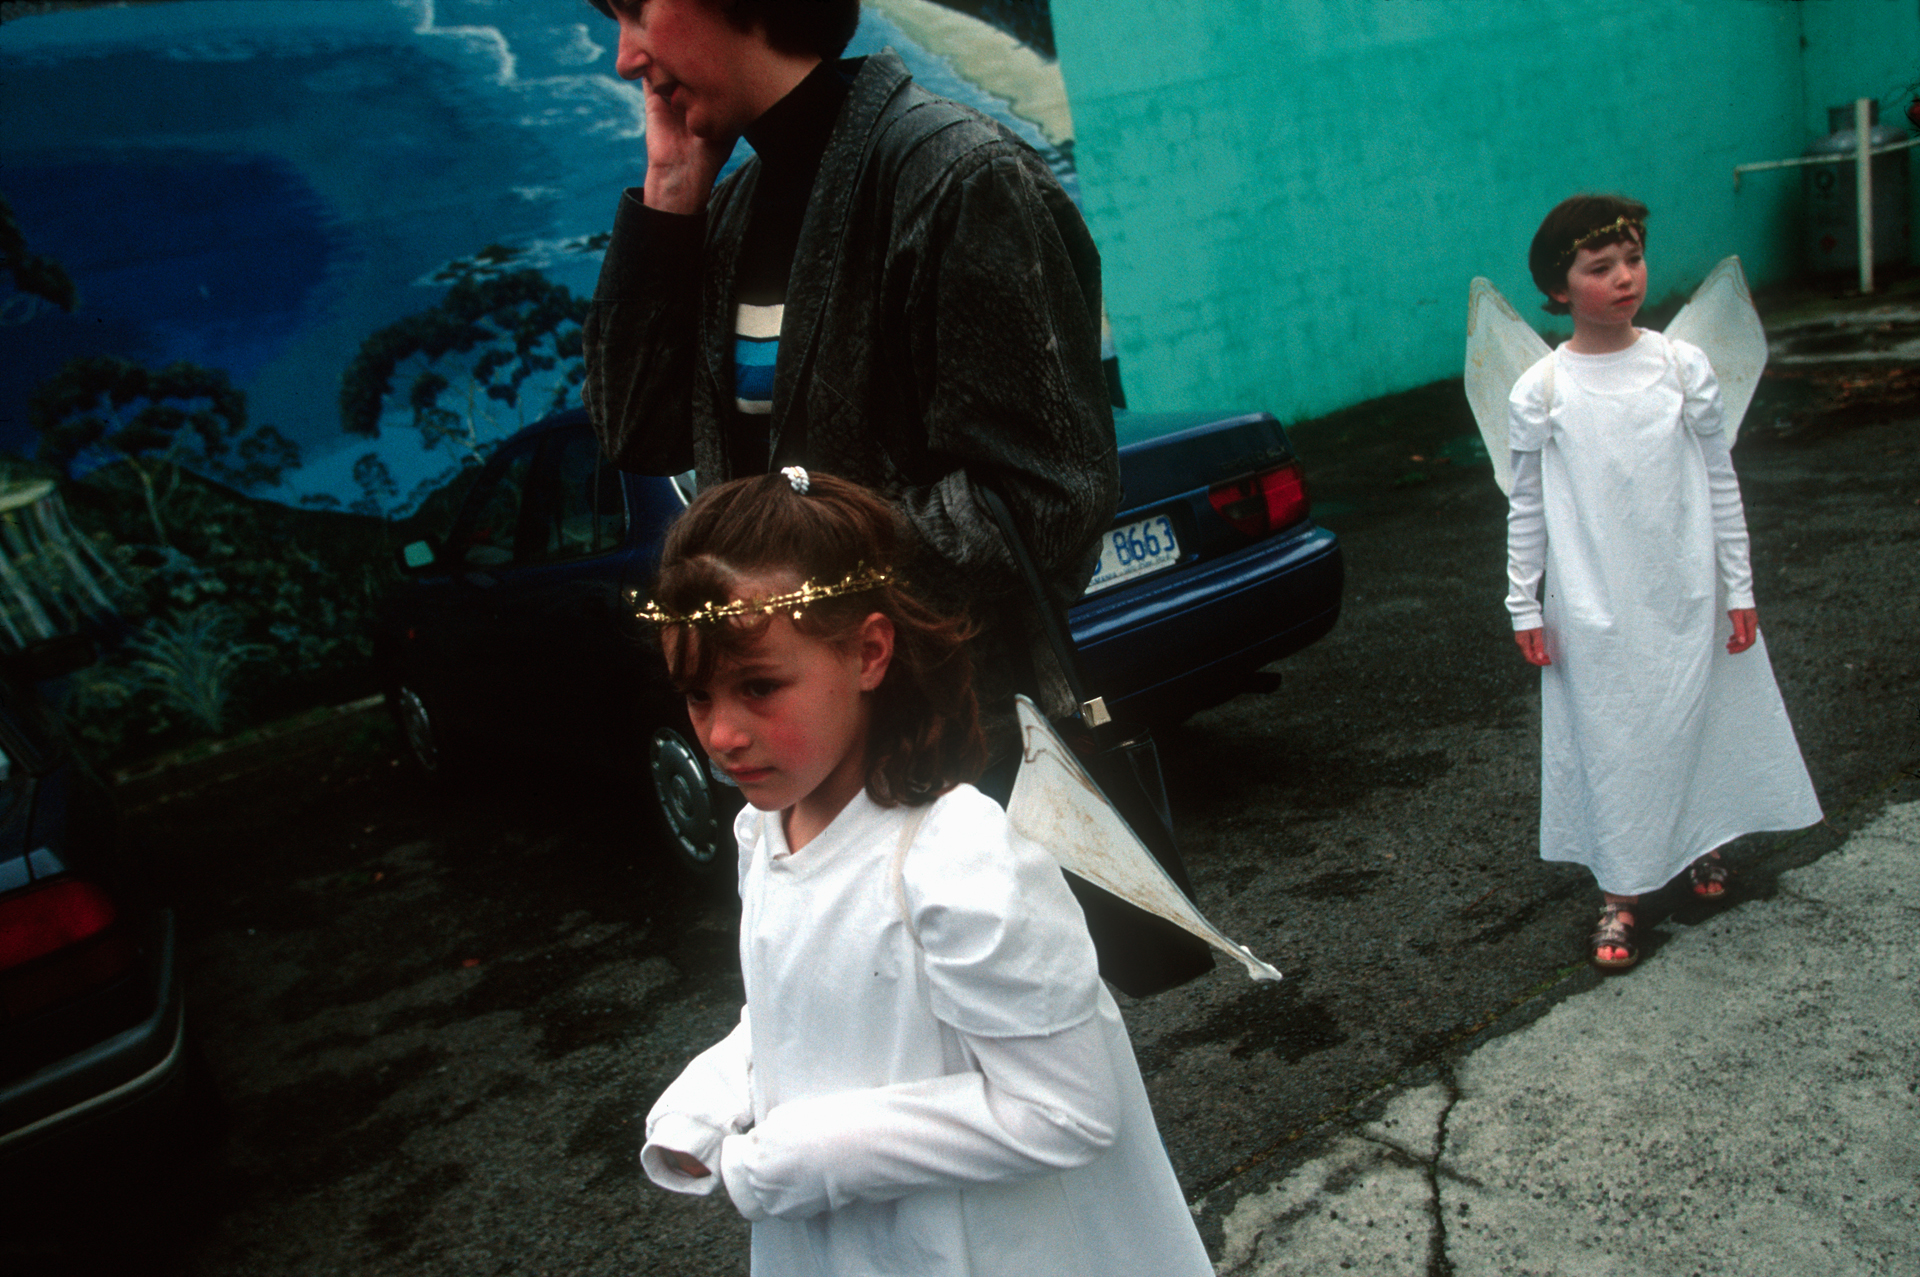  Two young girls dressed as angels are escorted by their mother to the Hobart annual Christmas Parade that kicks off the Christmas season in Tasmania.  Hobart  